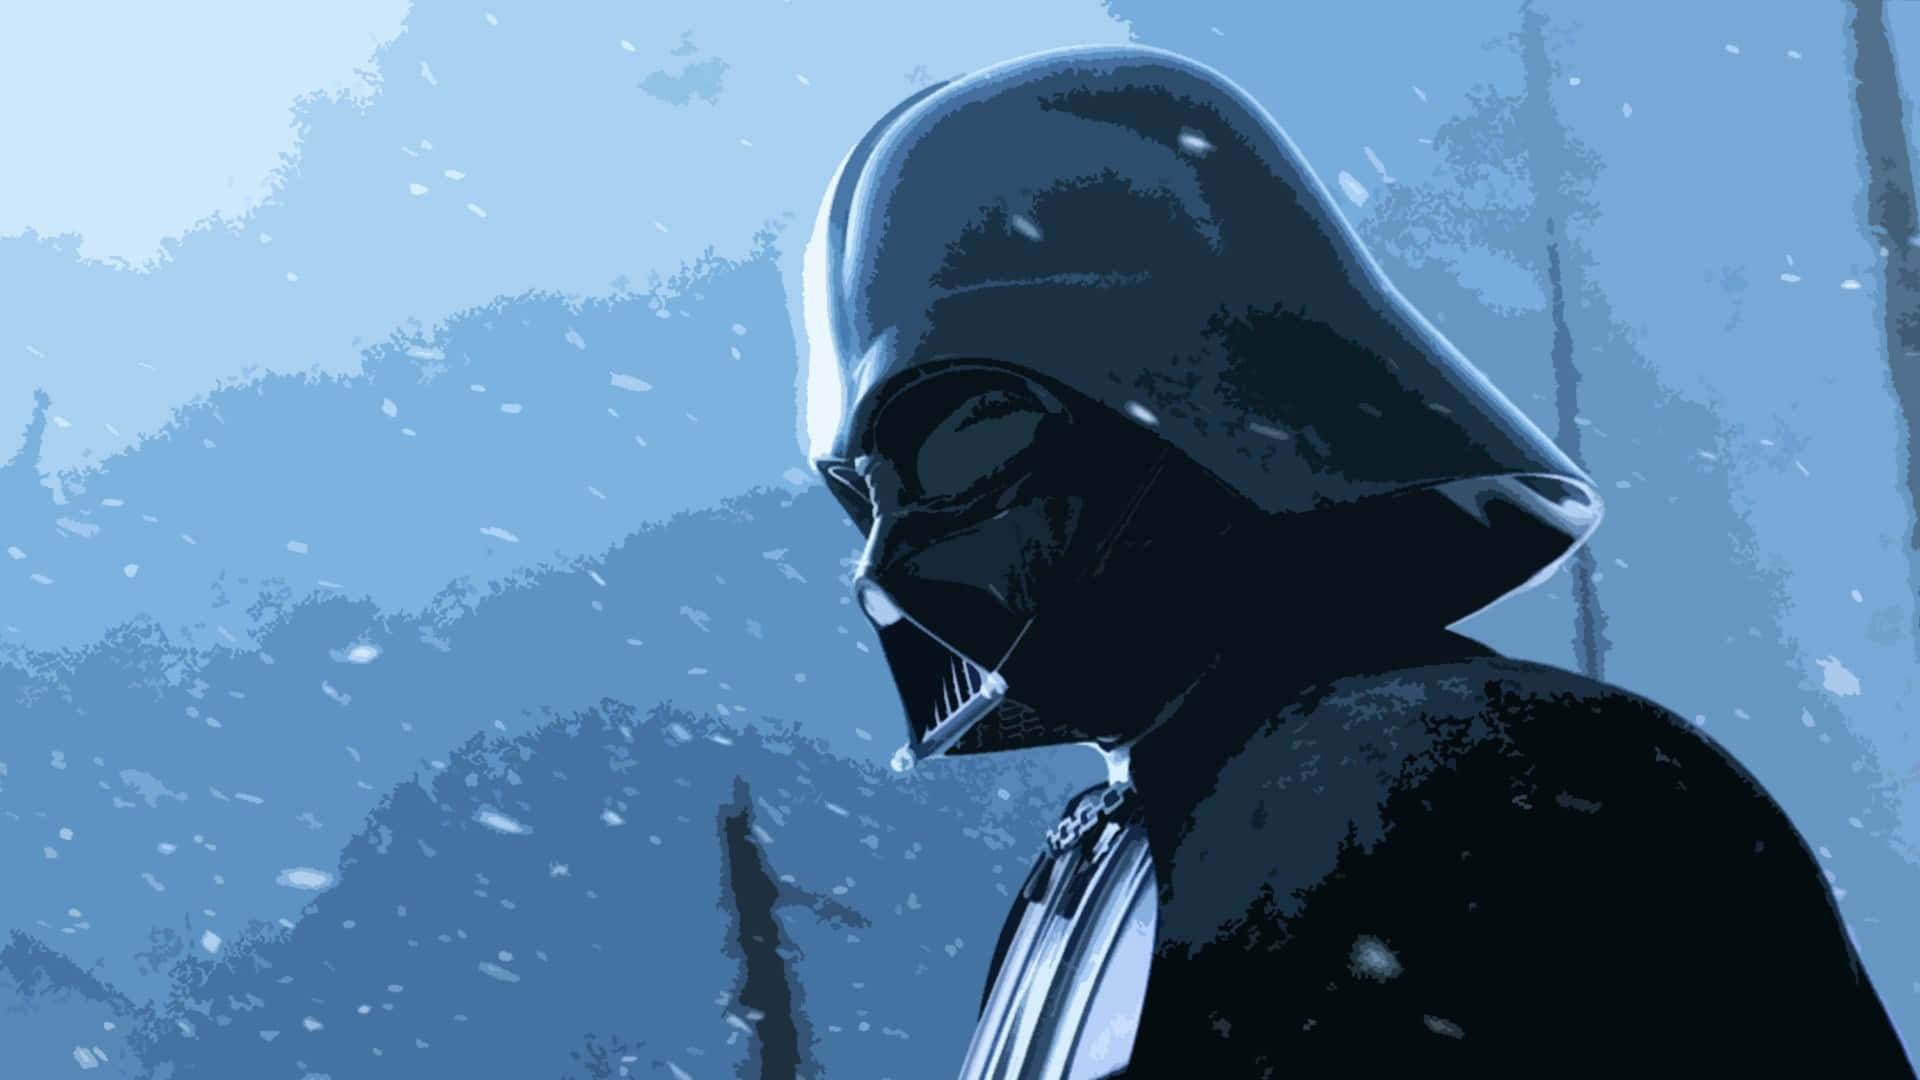 Experience the Dark Side of the Force with Darth Vader